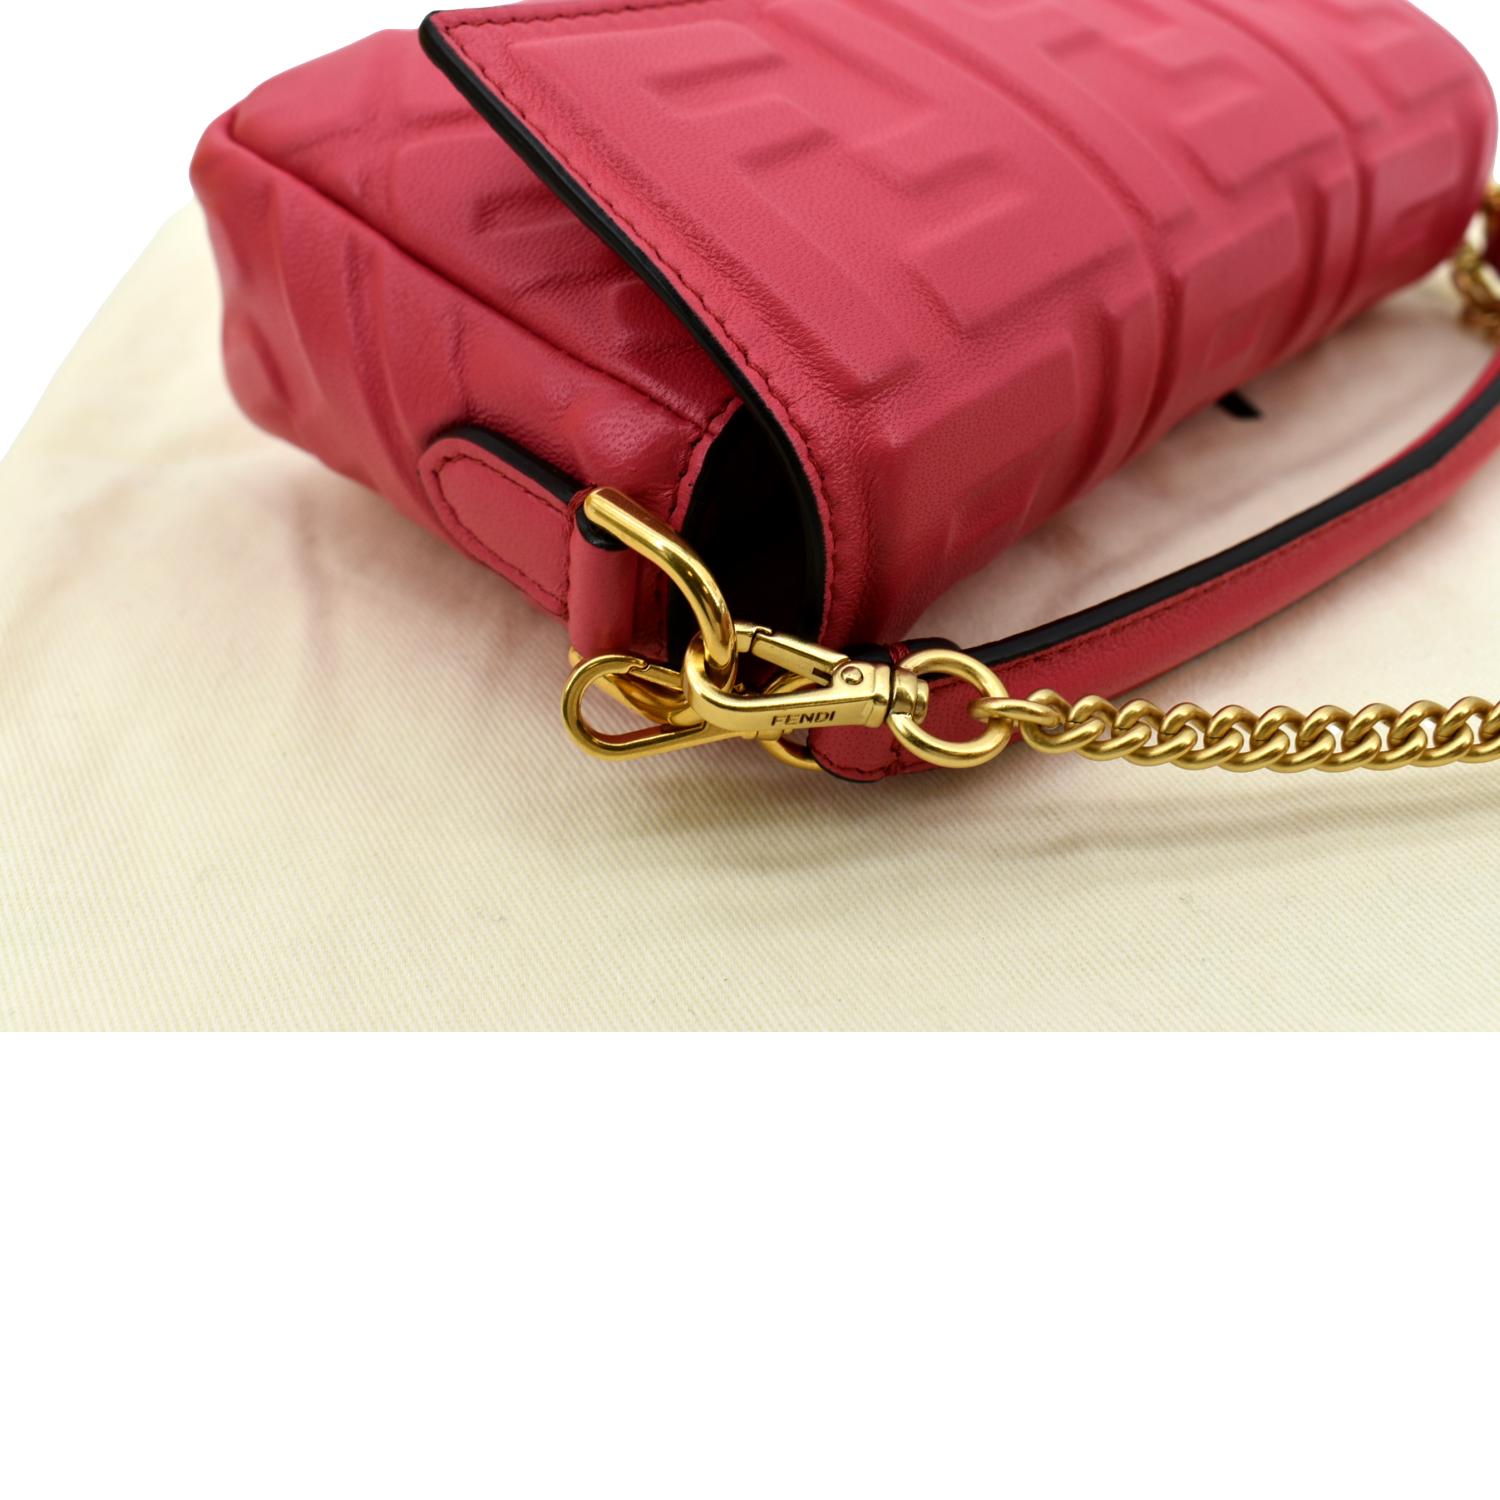 Fendi Baguette Phone Pouch in Pink